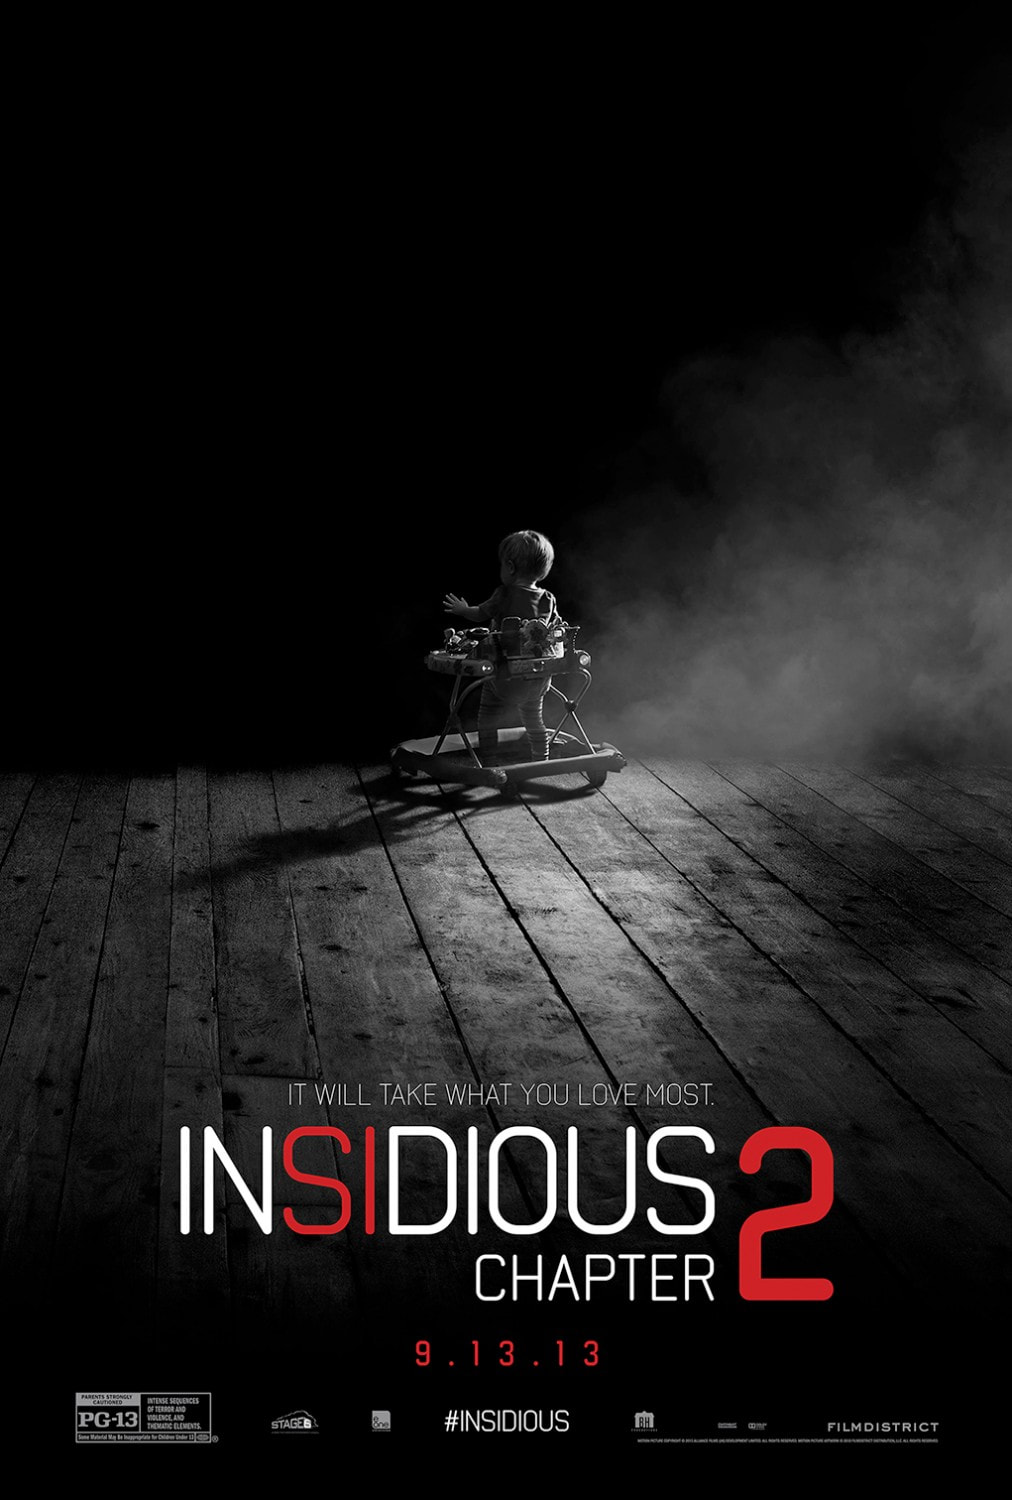 Insidious-Chapter-2-movie-2013-poster